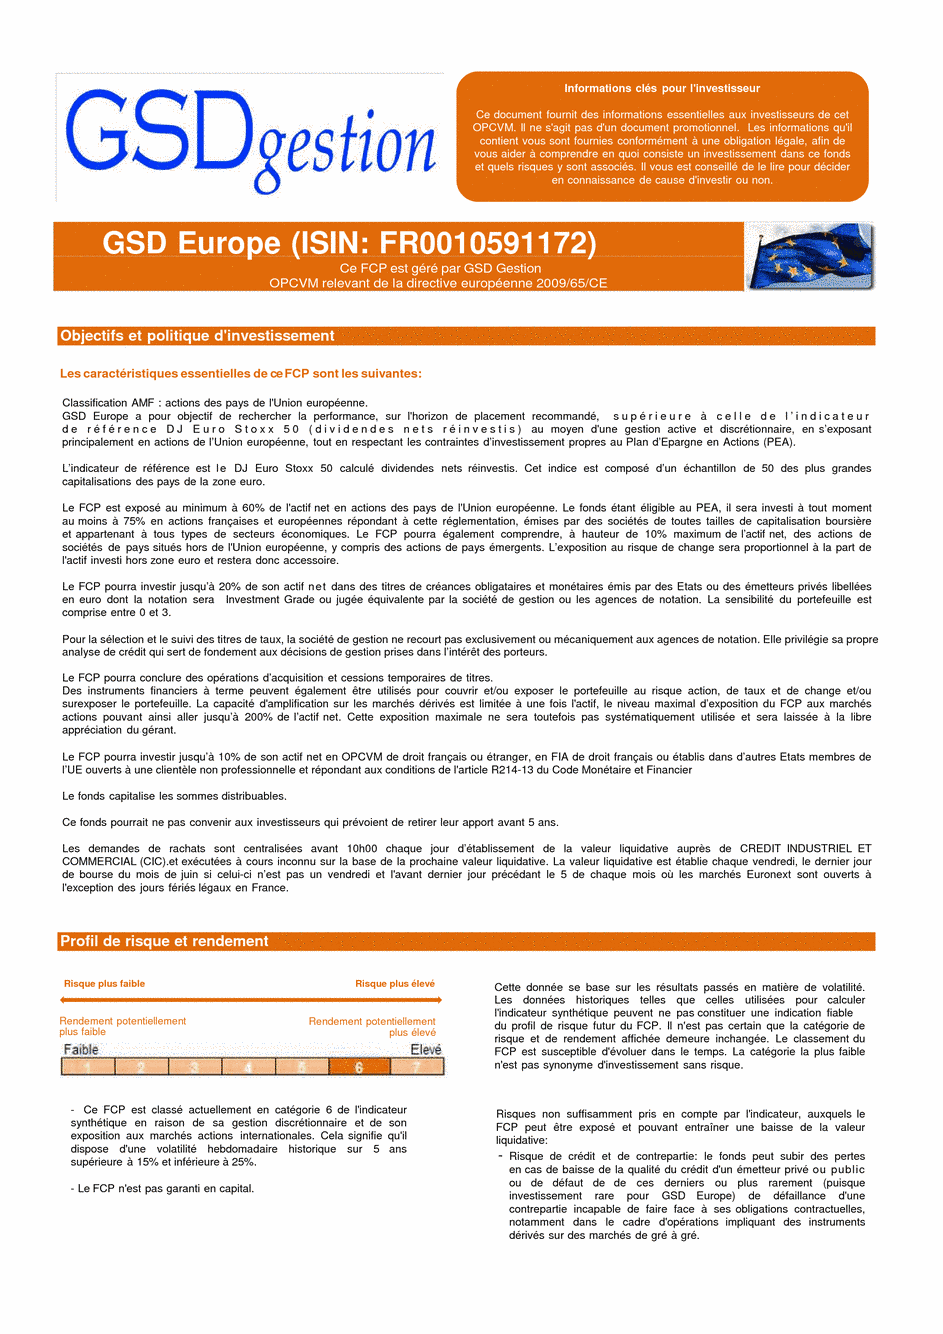 DICI-Prospectus Complet GSD Europe - 25/08/2017 - French